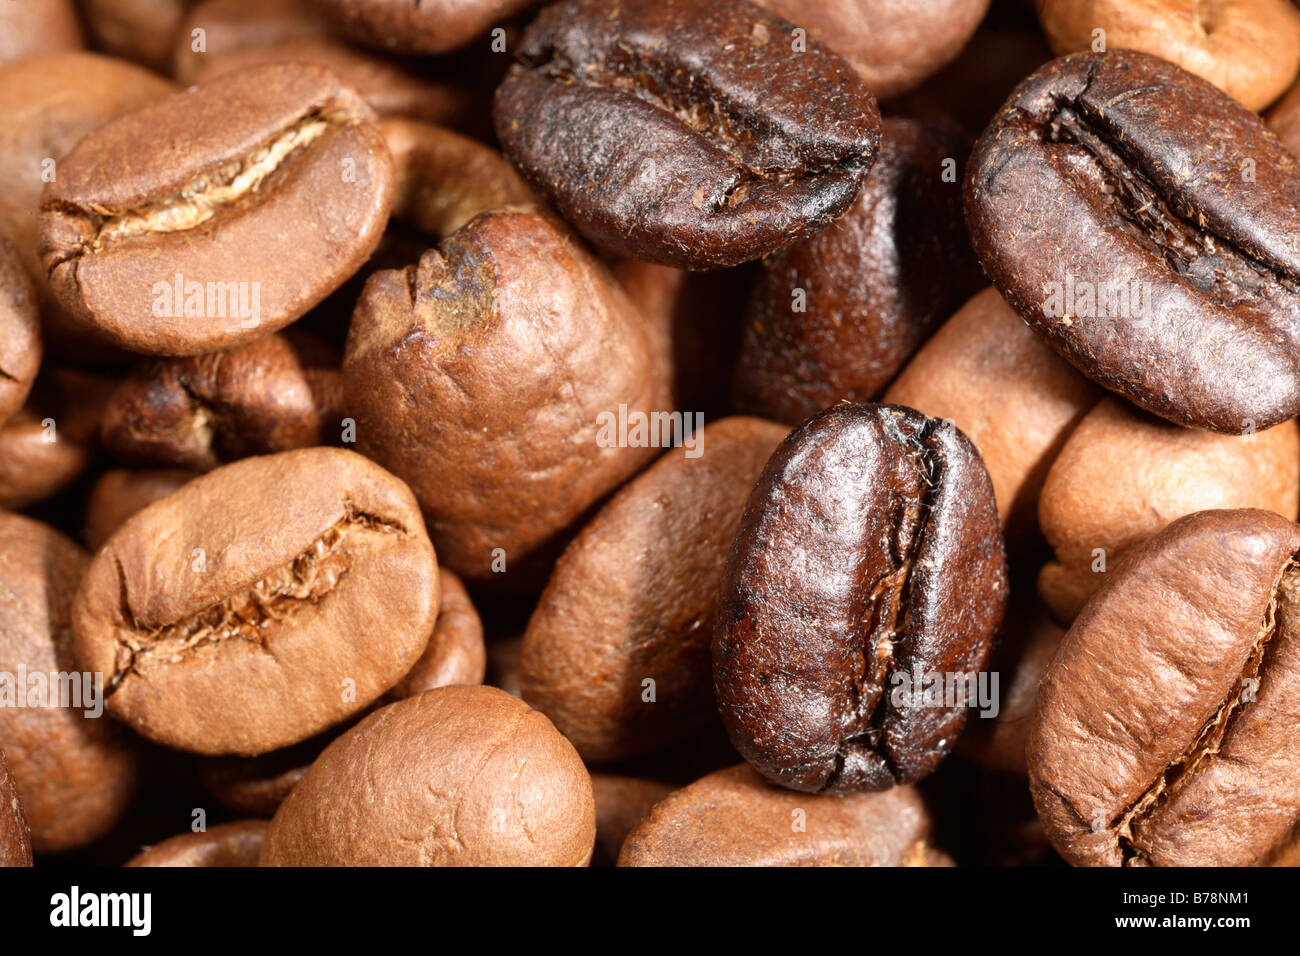 A blend of roasted Brazilian coffee beans,some light some dark,for making a medium strength coffee. Extreme magnification Stock Photo